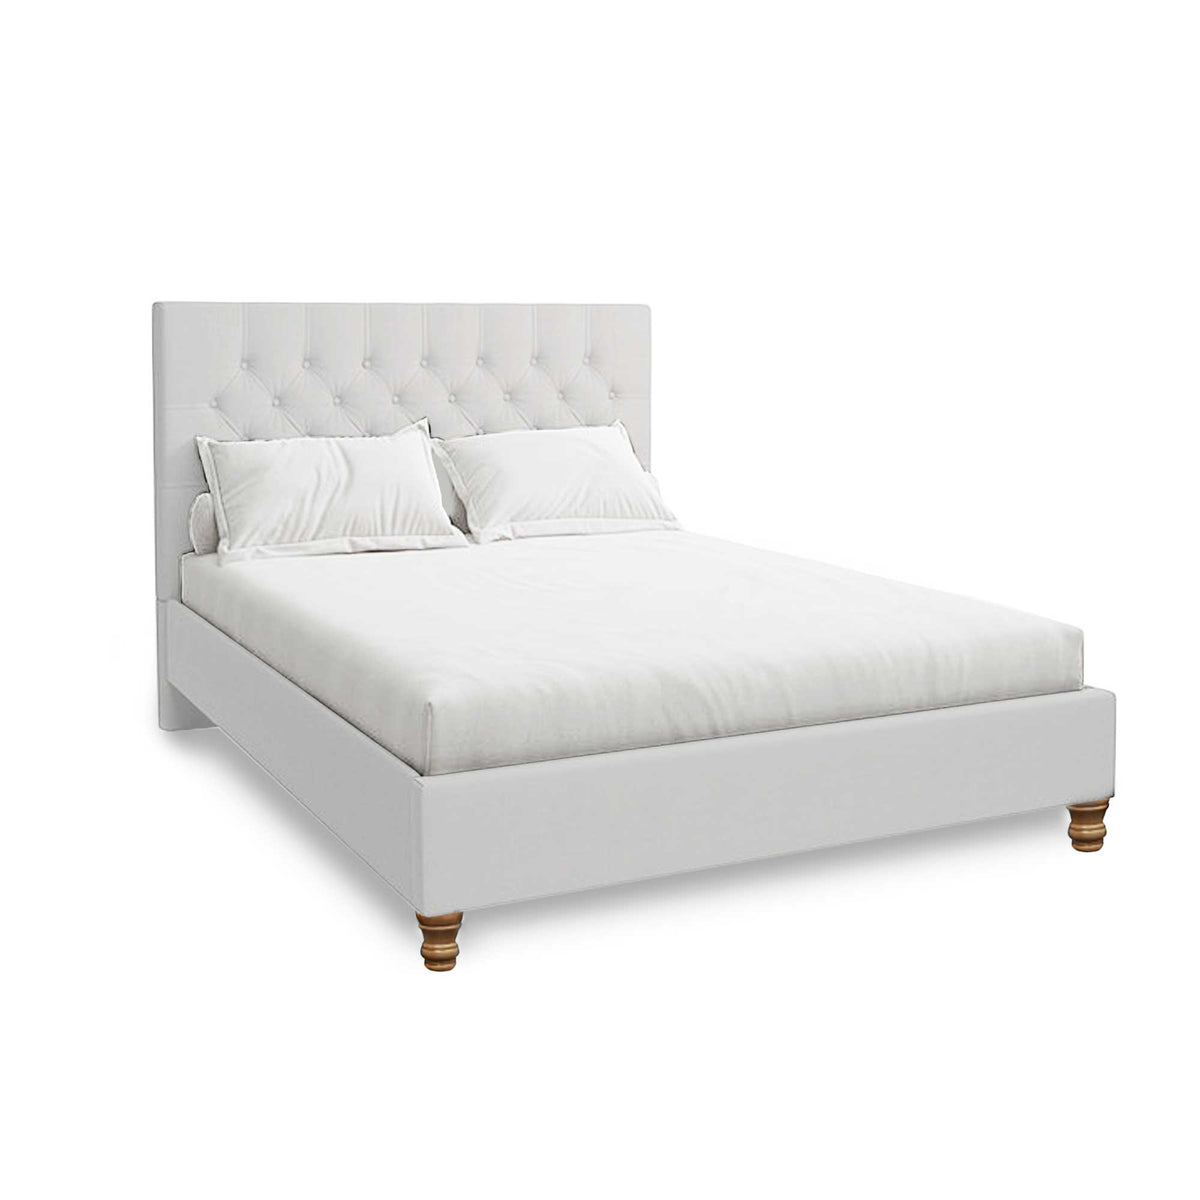 Meghan Linen Bed Frame - 2 Sizes & 2 Colours Available